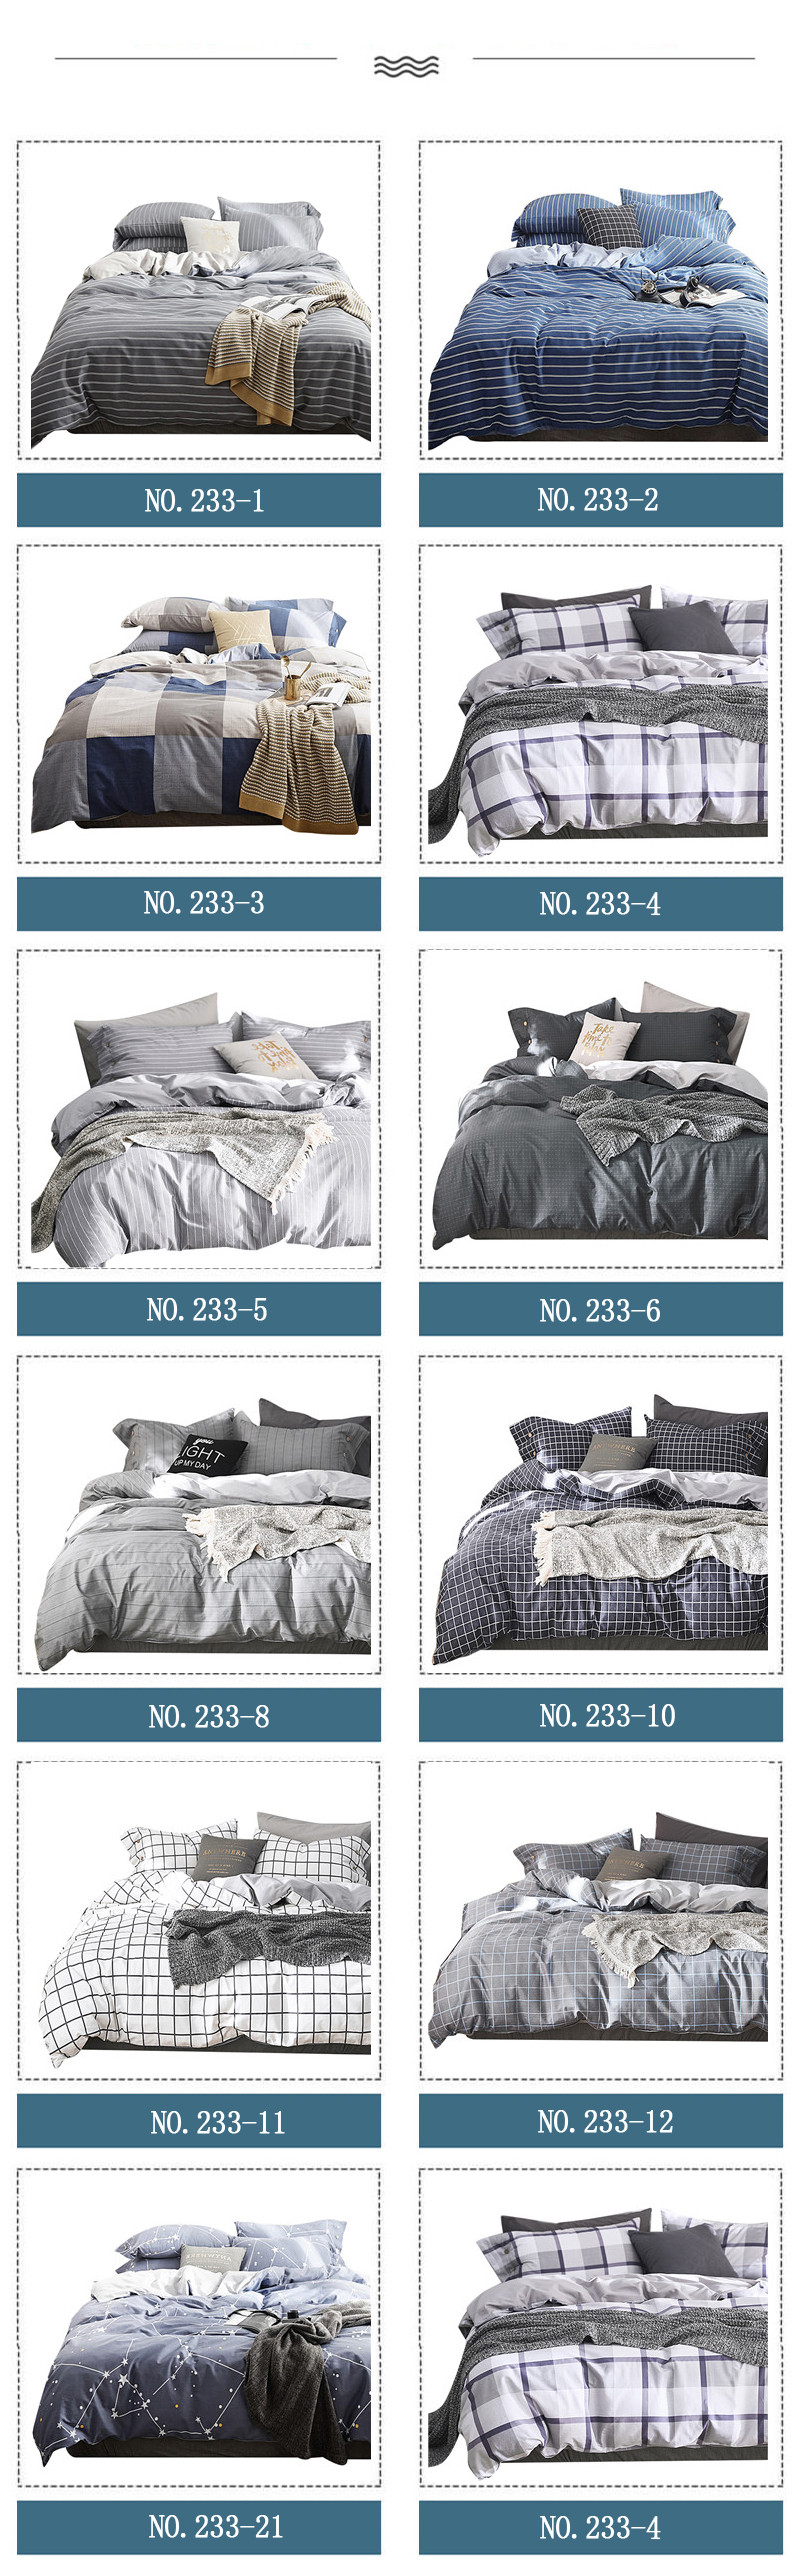 For Dorm Double Bed Bedding Set